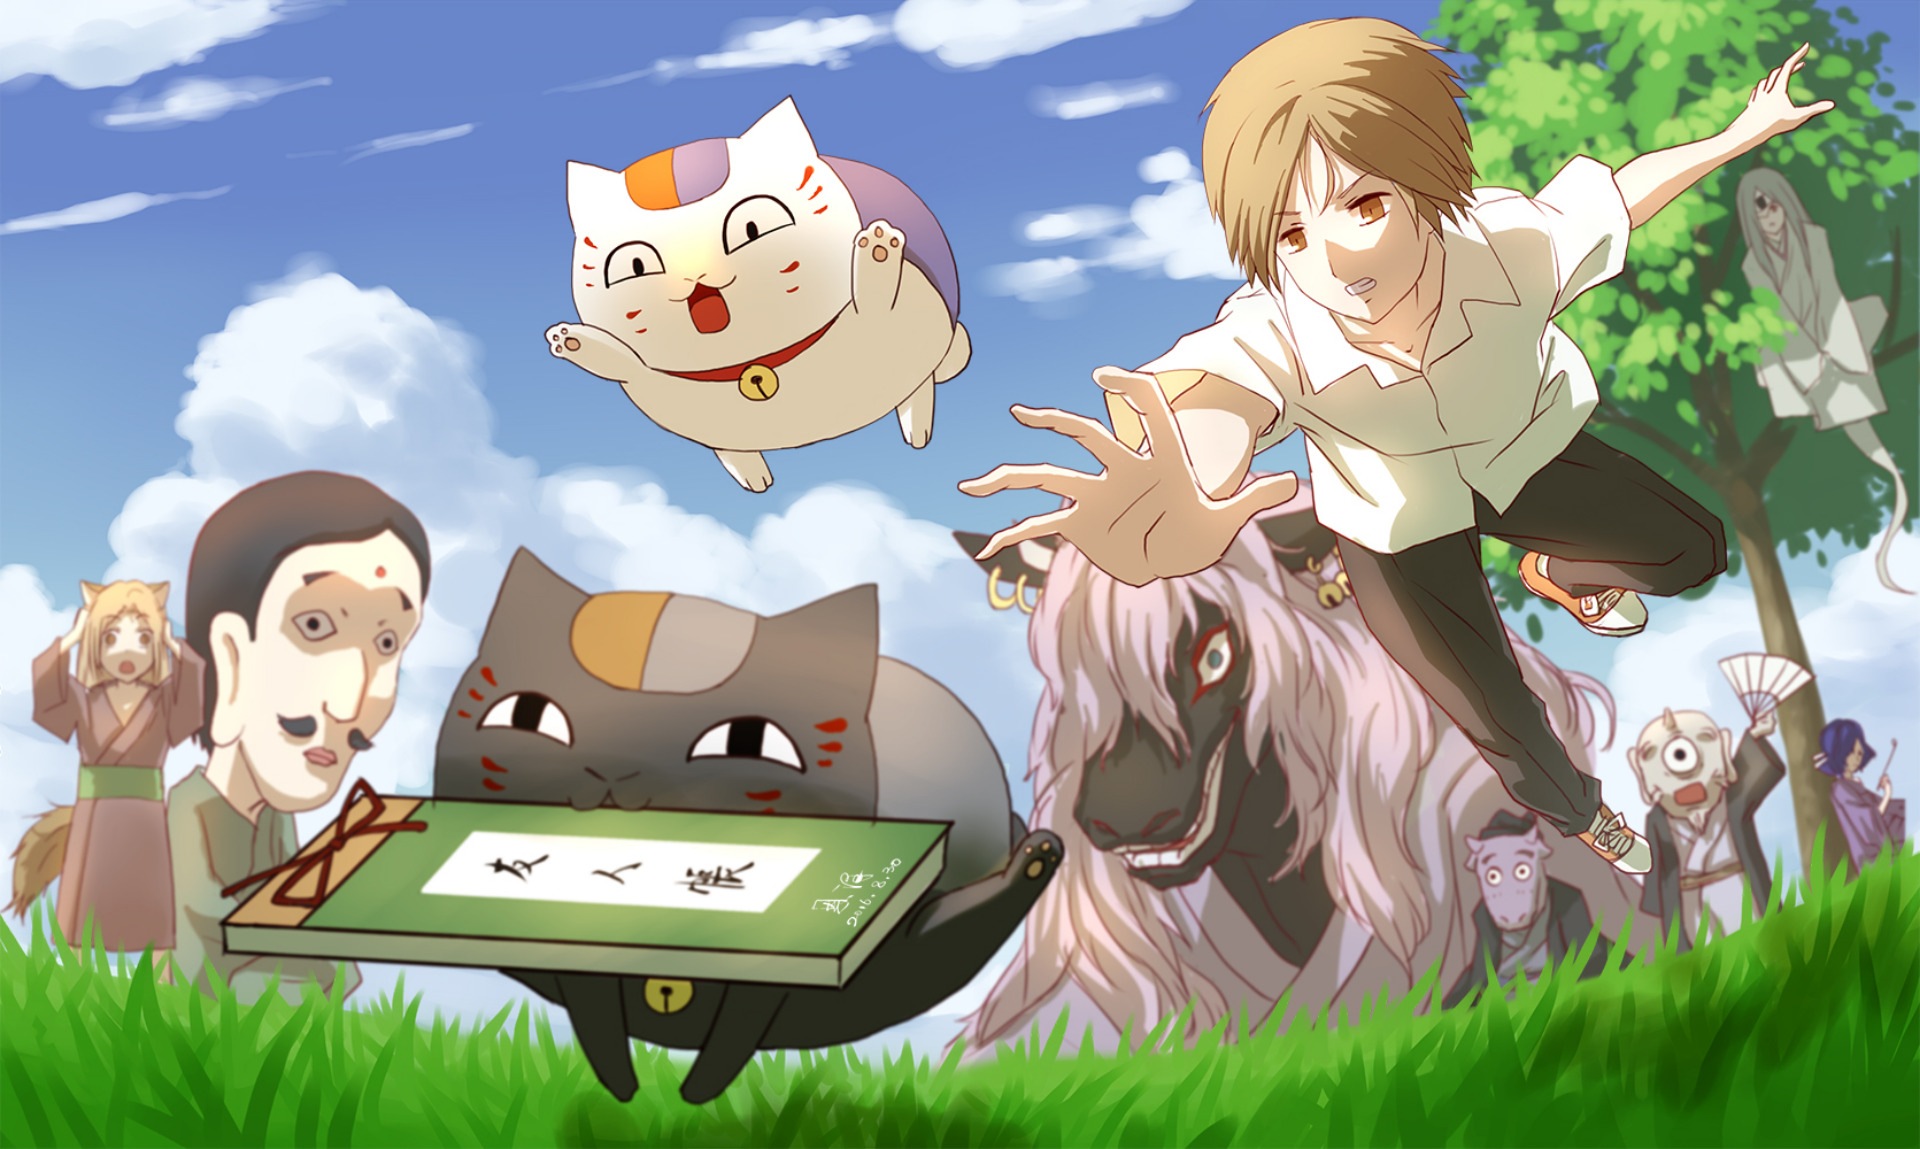 Anime Natsume's Book of Friends HD Wallpaper | Background Image